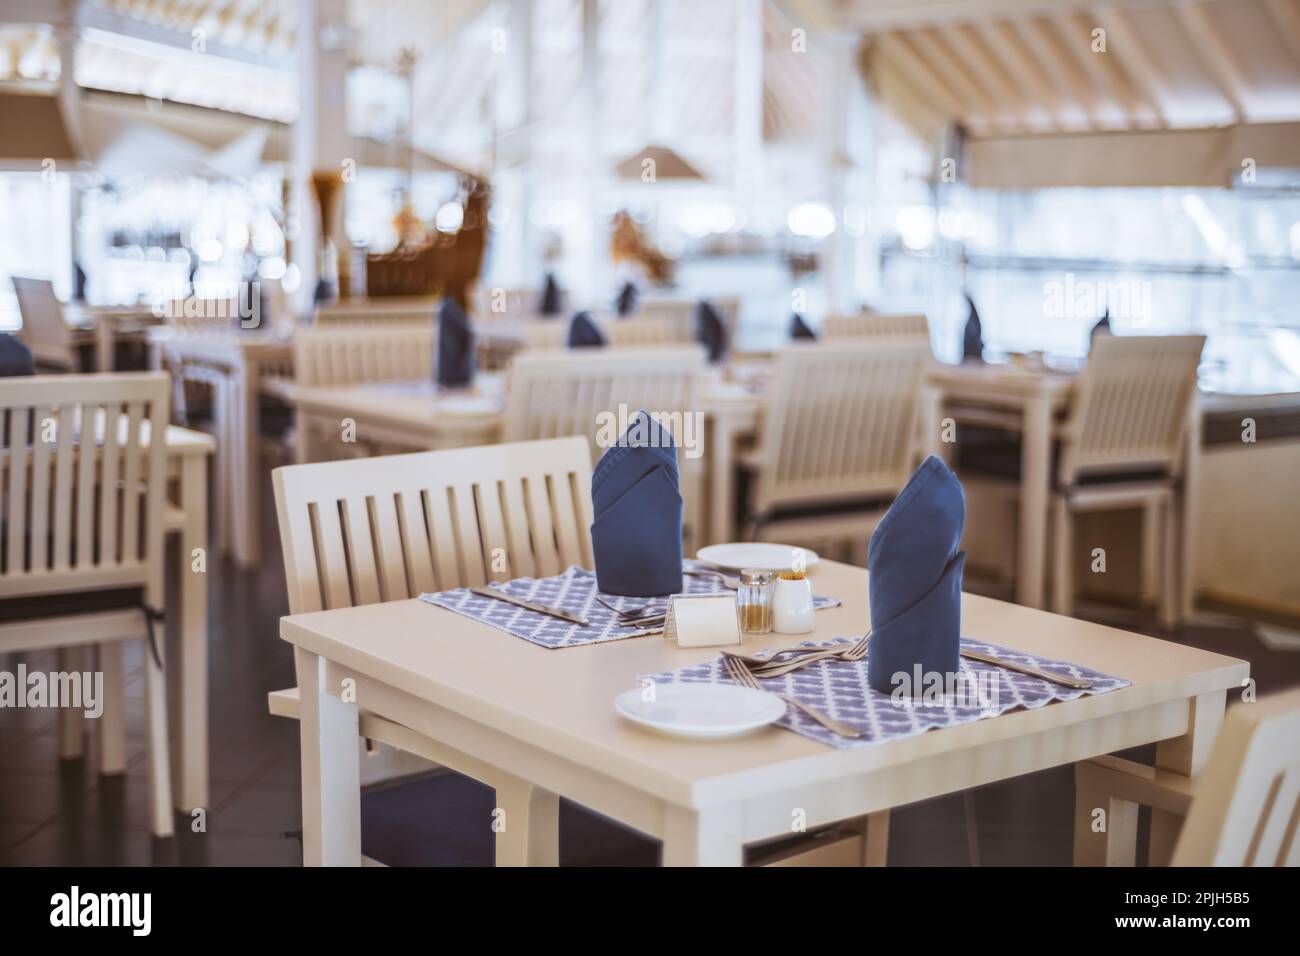 A single table with blue decoratively folded napkins, silverware ...